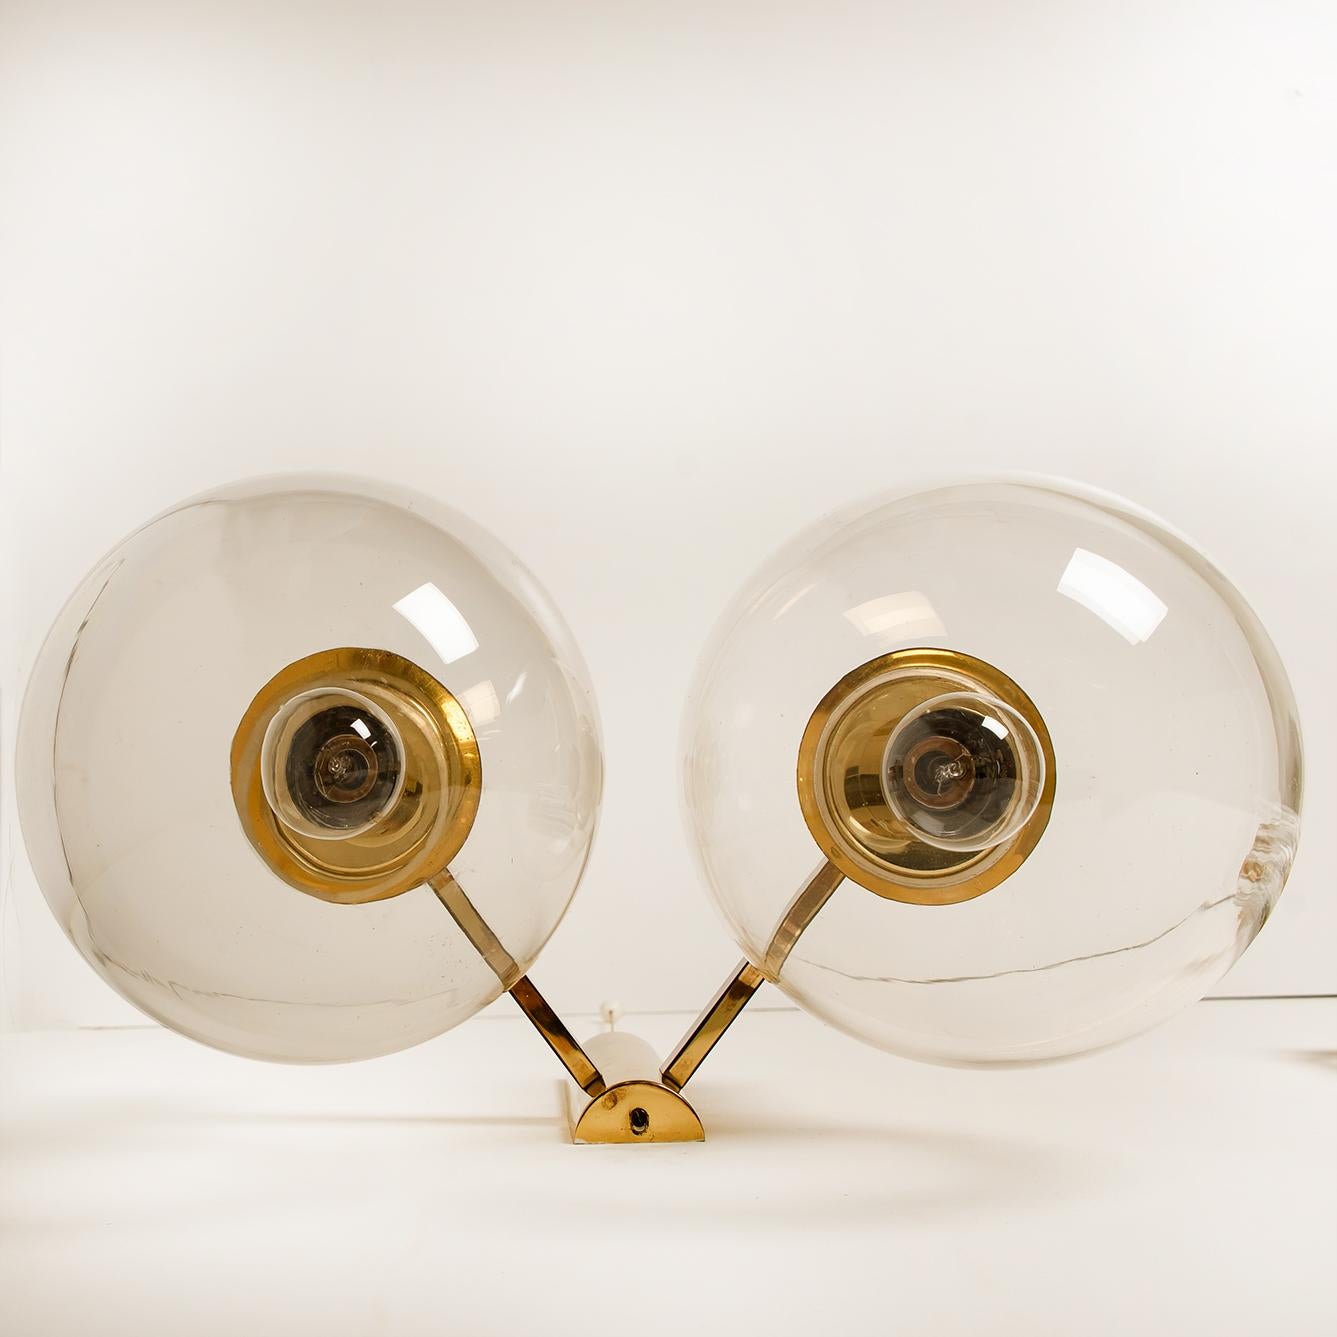 Multi-globe Mid-Century Modern wall lights with clear glass globes. The wall lights are 2 armed. Designed in the style of Hans-Agne Jakobsson. Illuminates beautifully.




Measures: Height 15.7 in. (40 cm), depth 10.6 (27 cm), width 17.3 in.